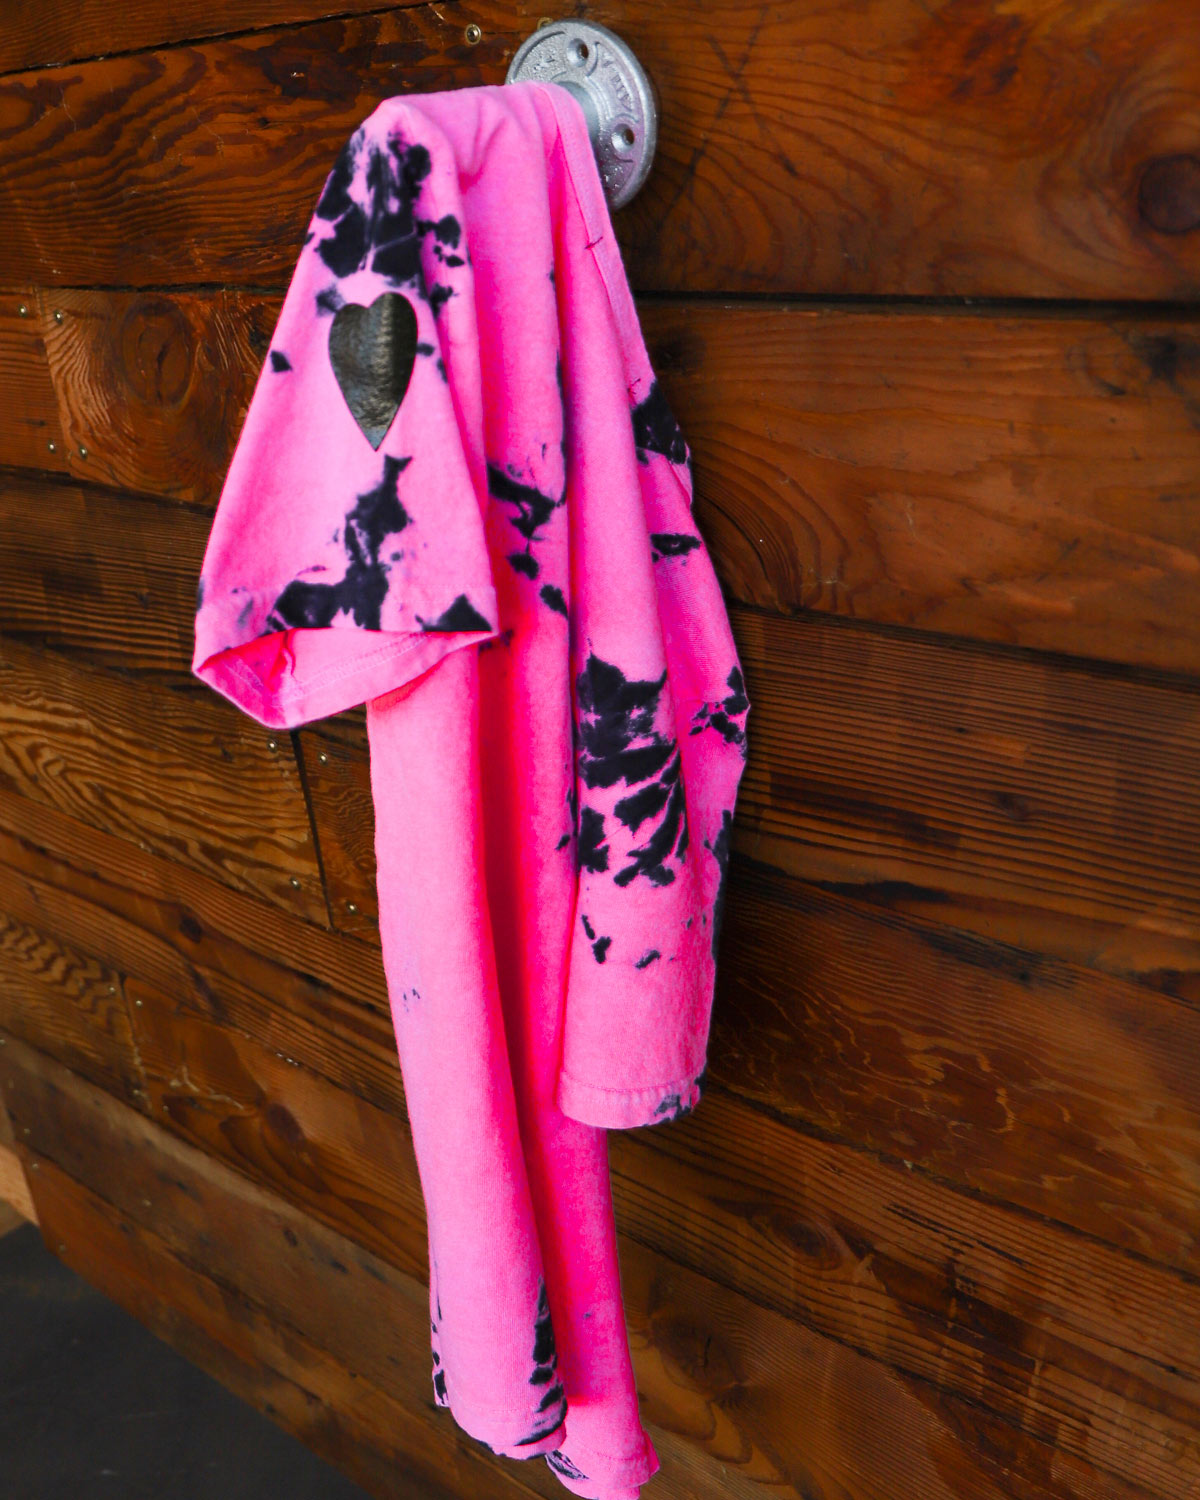 Pink and black hand dyed tie dye shirt hanging on wood wall